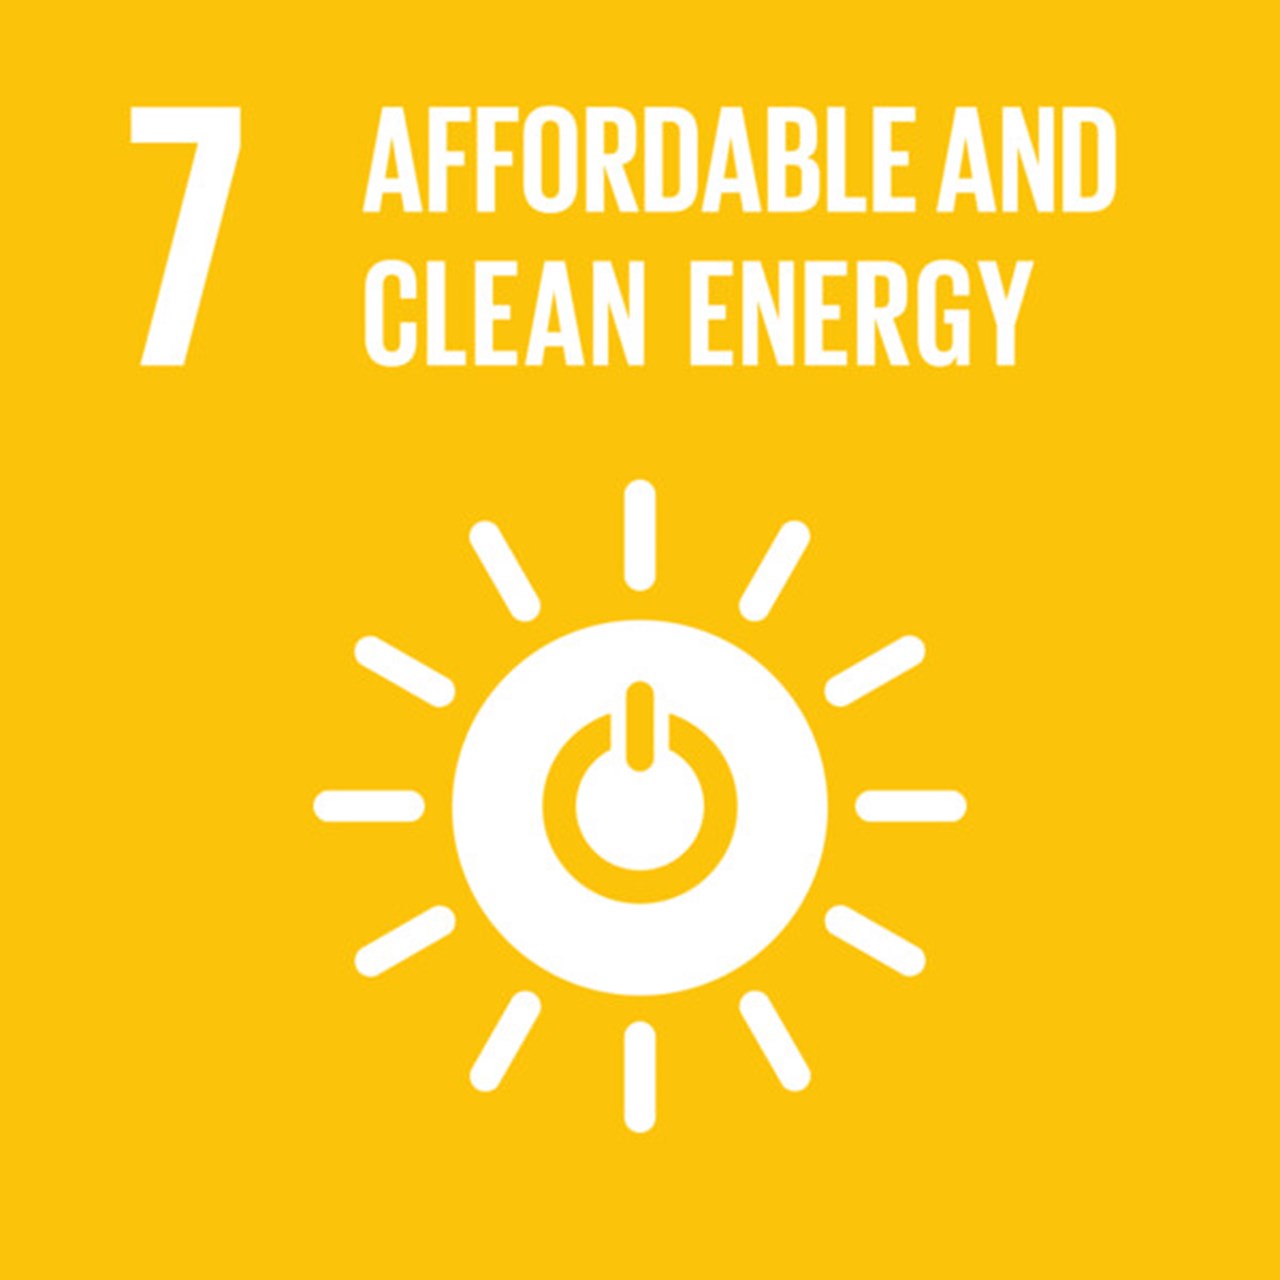 The Global Goals, Goal 7 - Affordable and Clean Energy